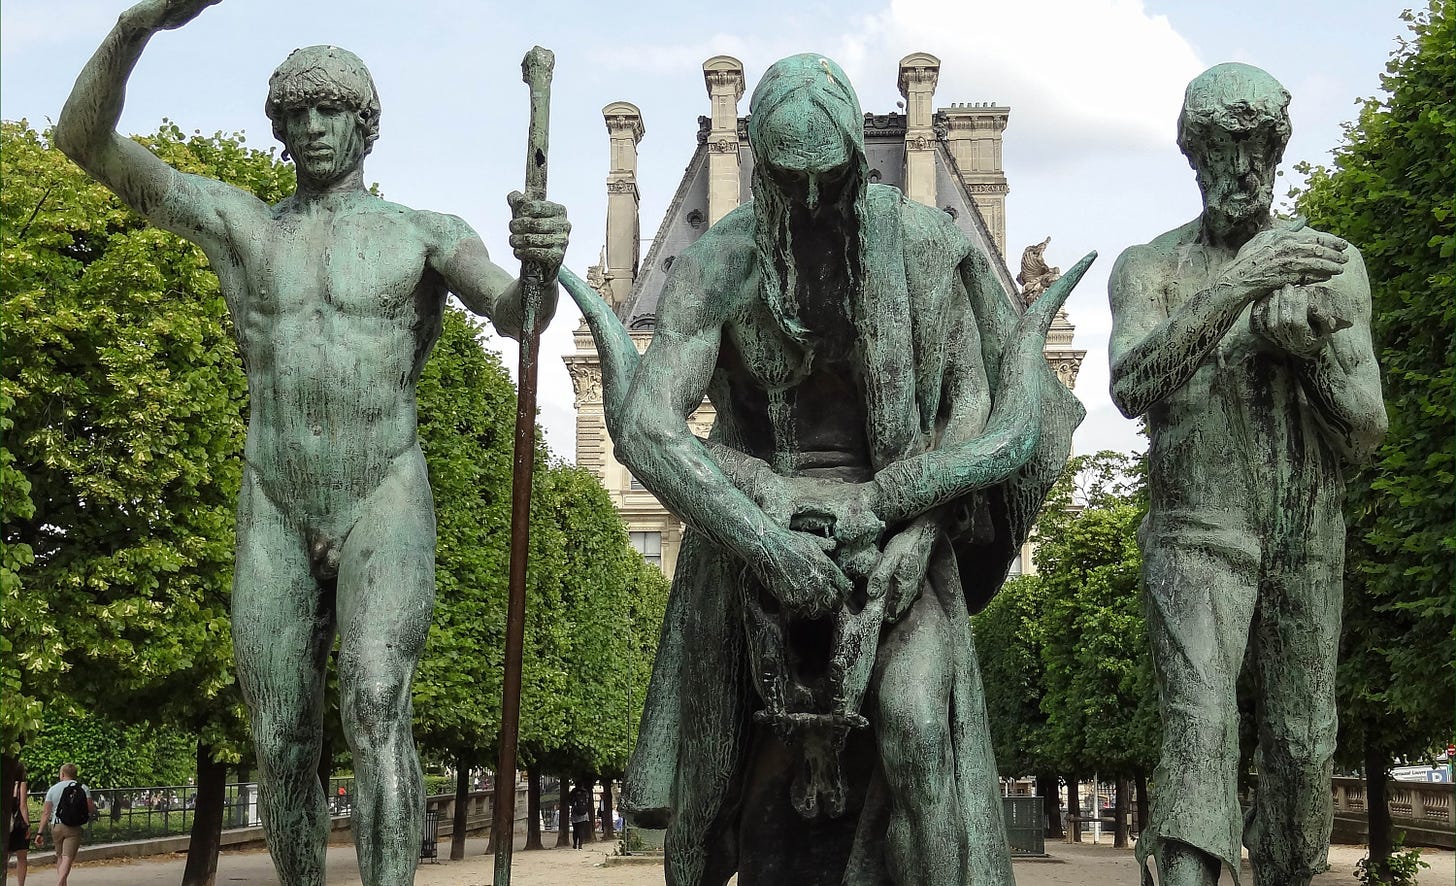 The Sons of Cain, as depicted in a statue in Paris.